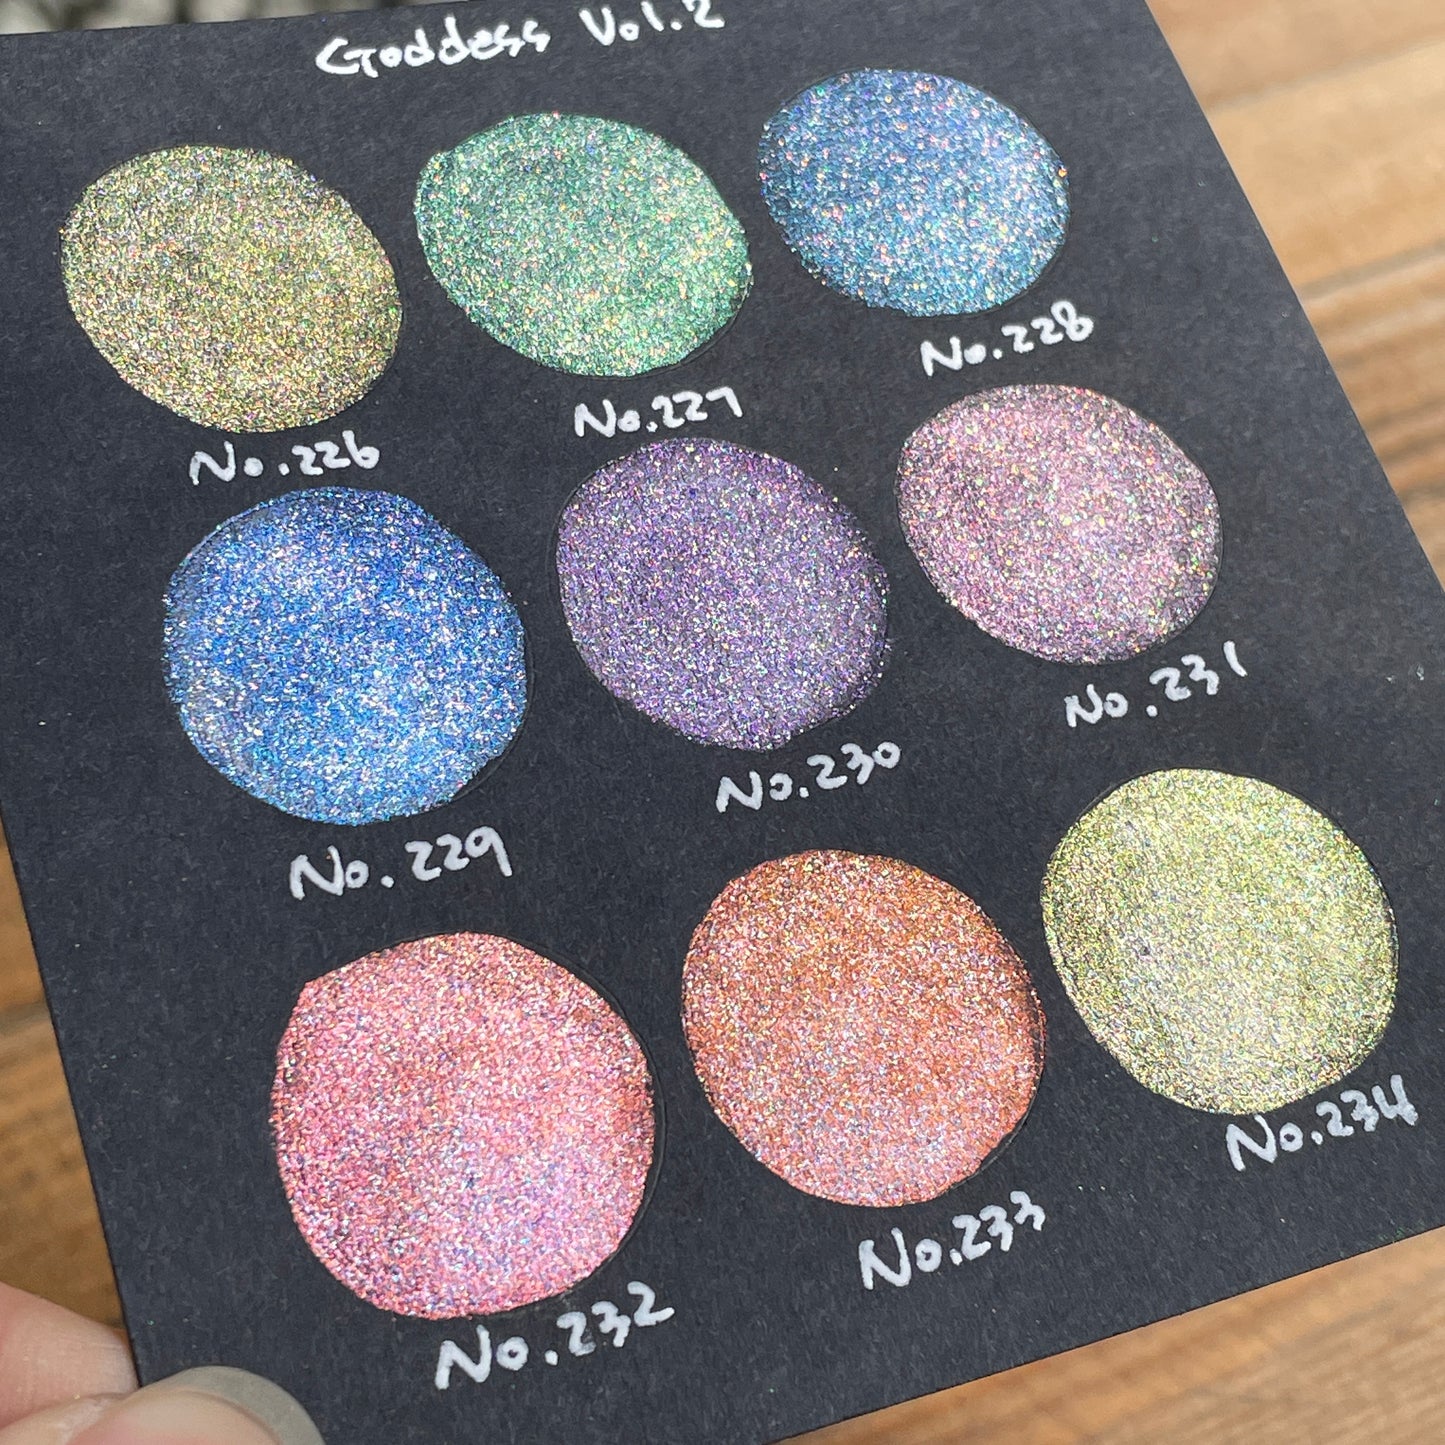 Limited No.232 Vol.2 Goddess Handmade Super Shift Aurora Shimmer Holographic Watercolor Paints by iuilewatercolors